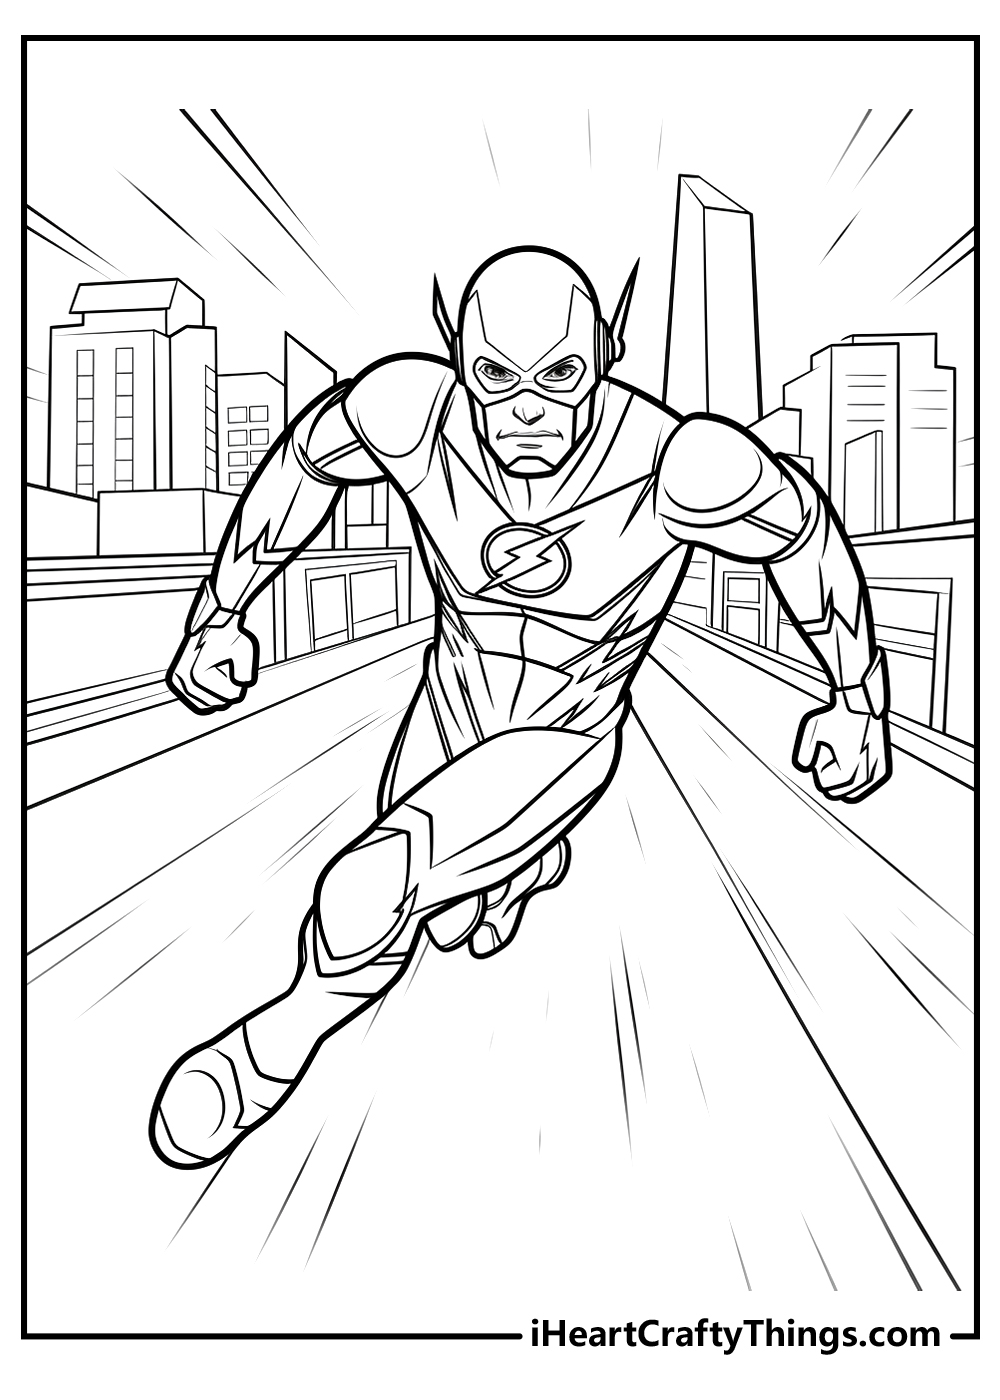 Printable the flash coloring pages updated